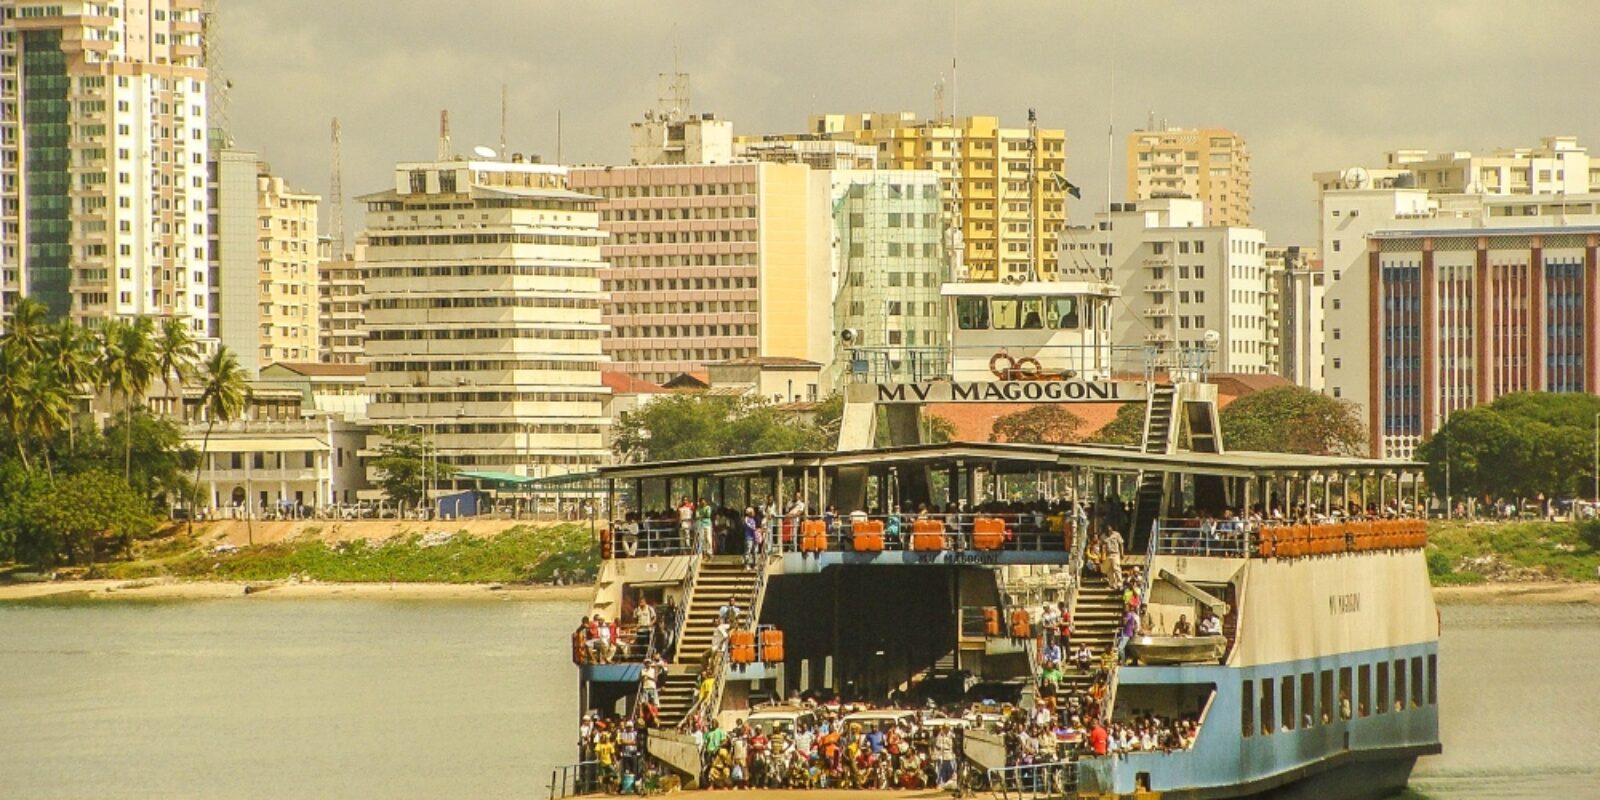 An image of tourists riding the Kigamboni ferry for the topic about senior vacation to Dar es Salaam.